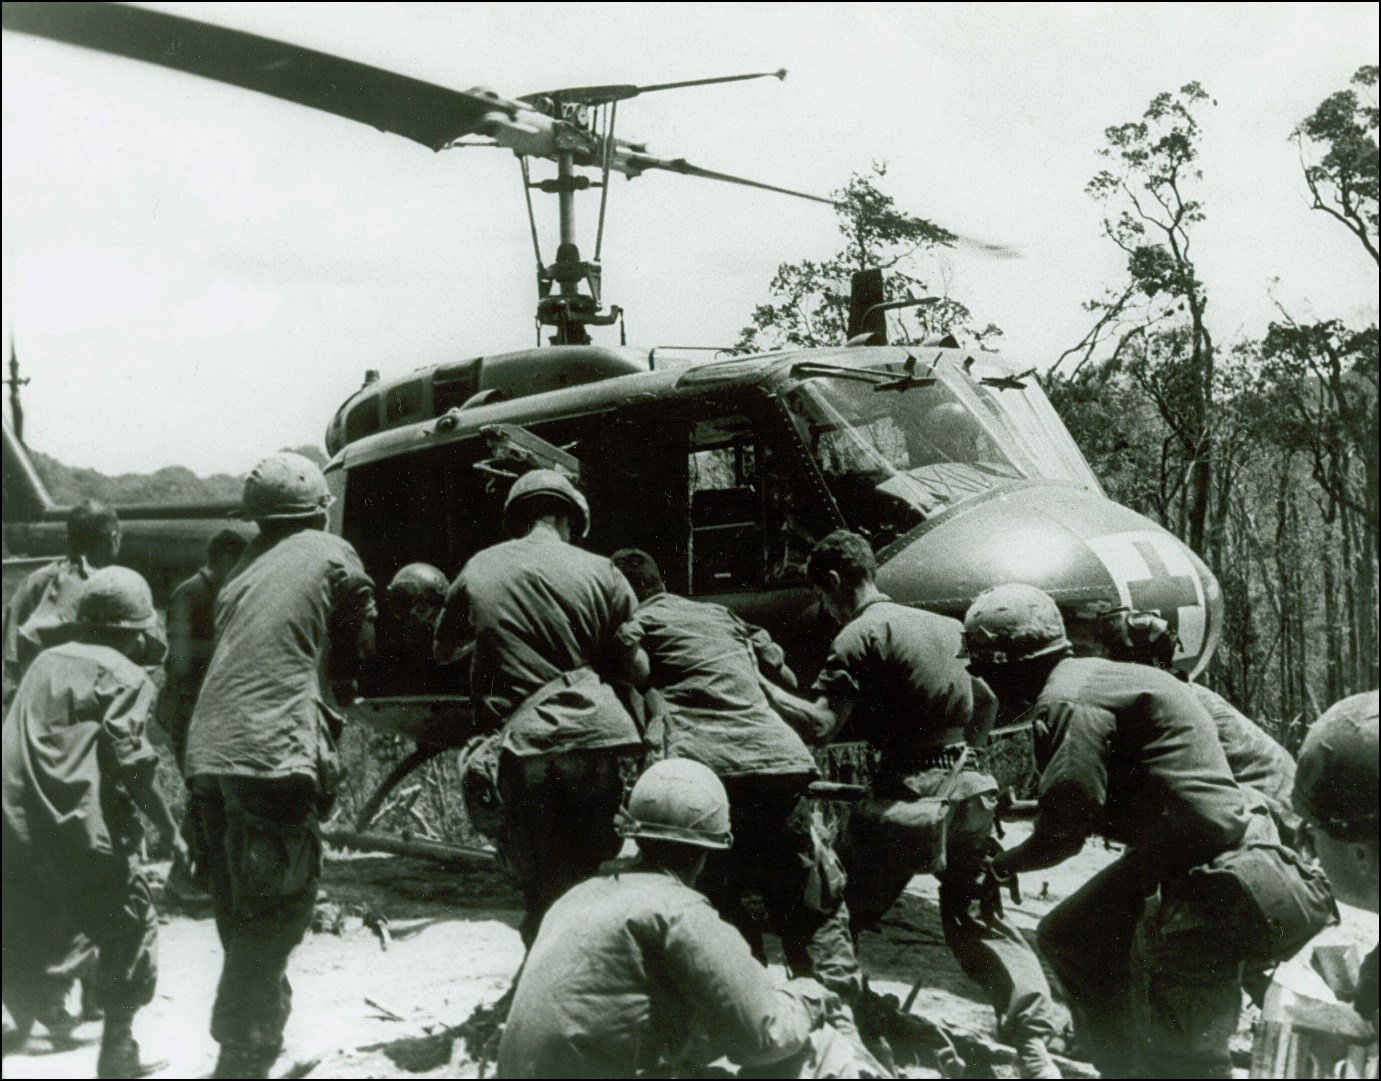 U.S. Army soldiers of the 101st Airborne load wounded servicemen into a medevac helicopter during Operation APACHE SNOW, May 1969